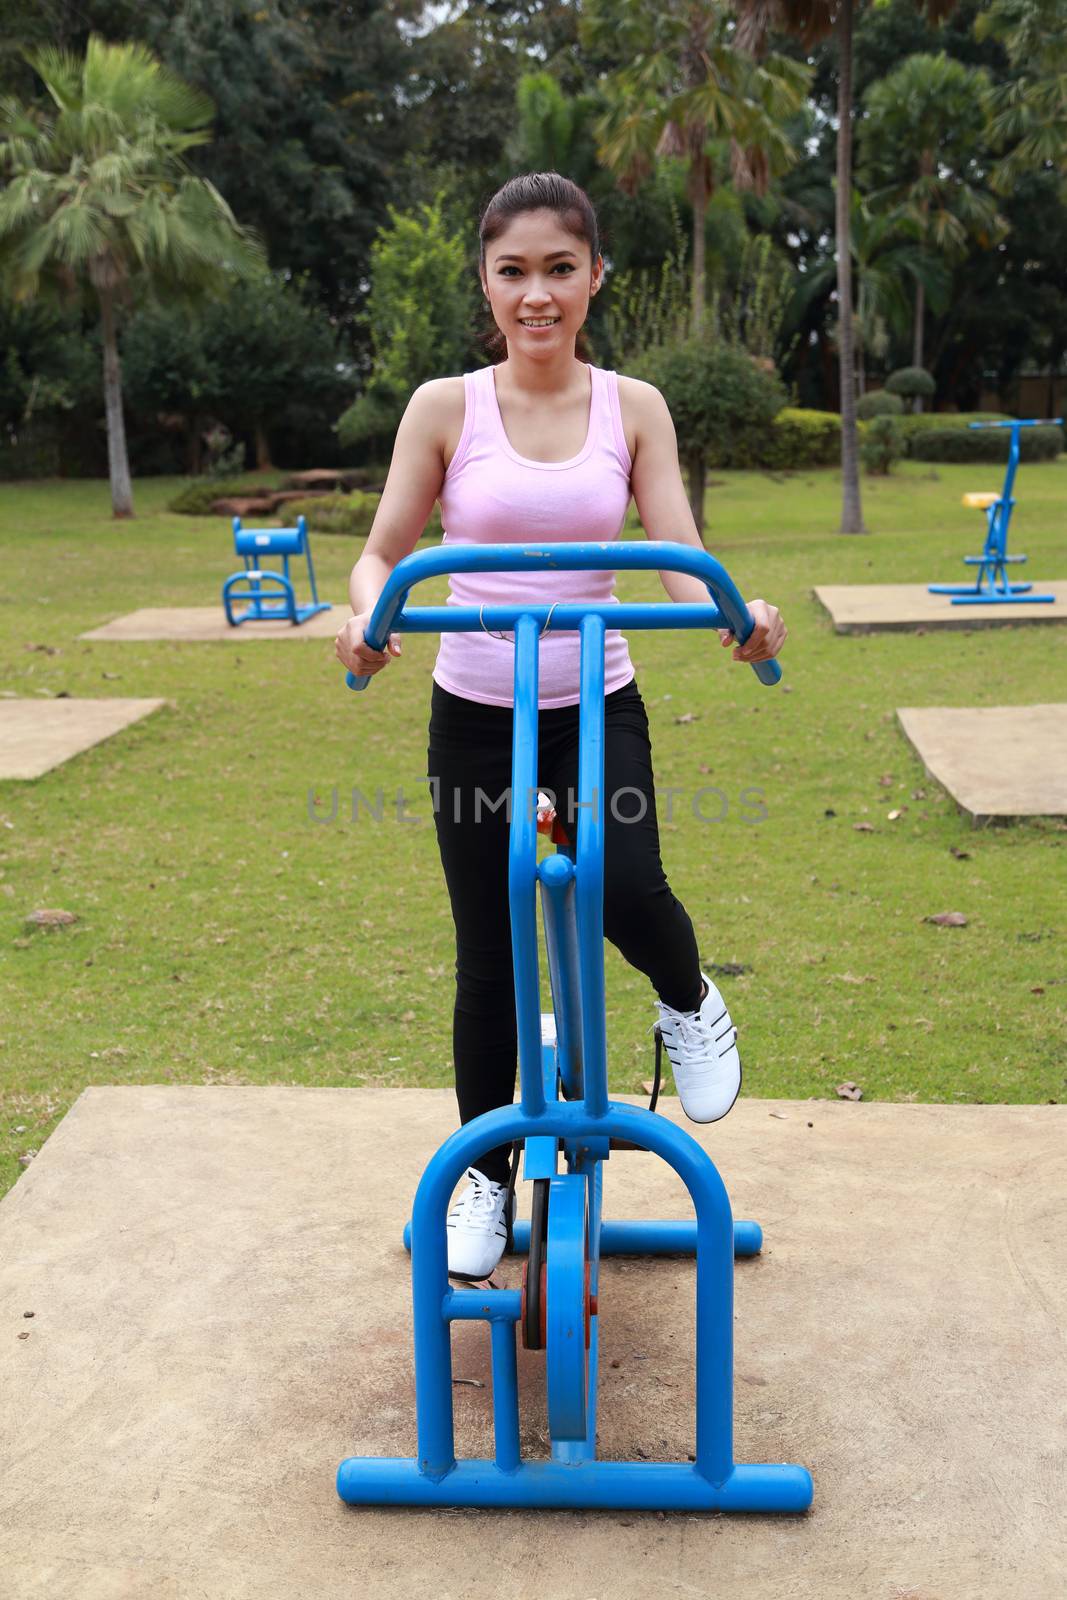 woman exercising with exercise equipment in the park by geargodz